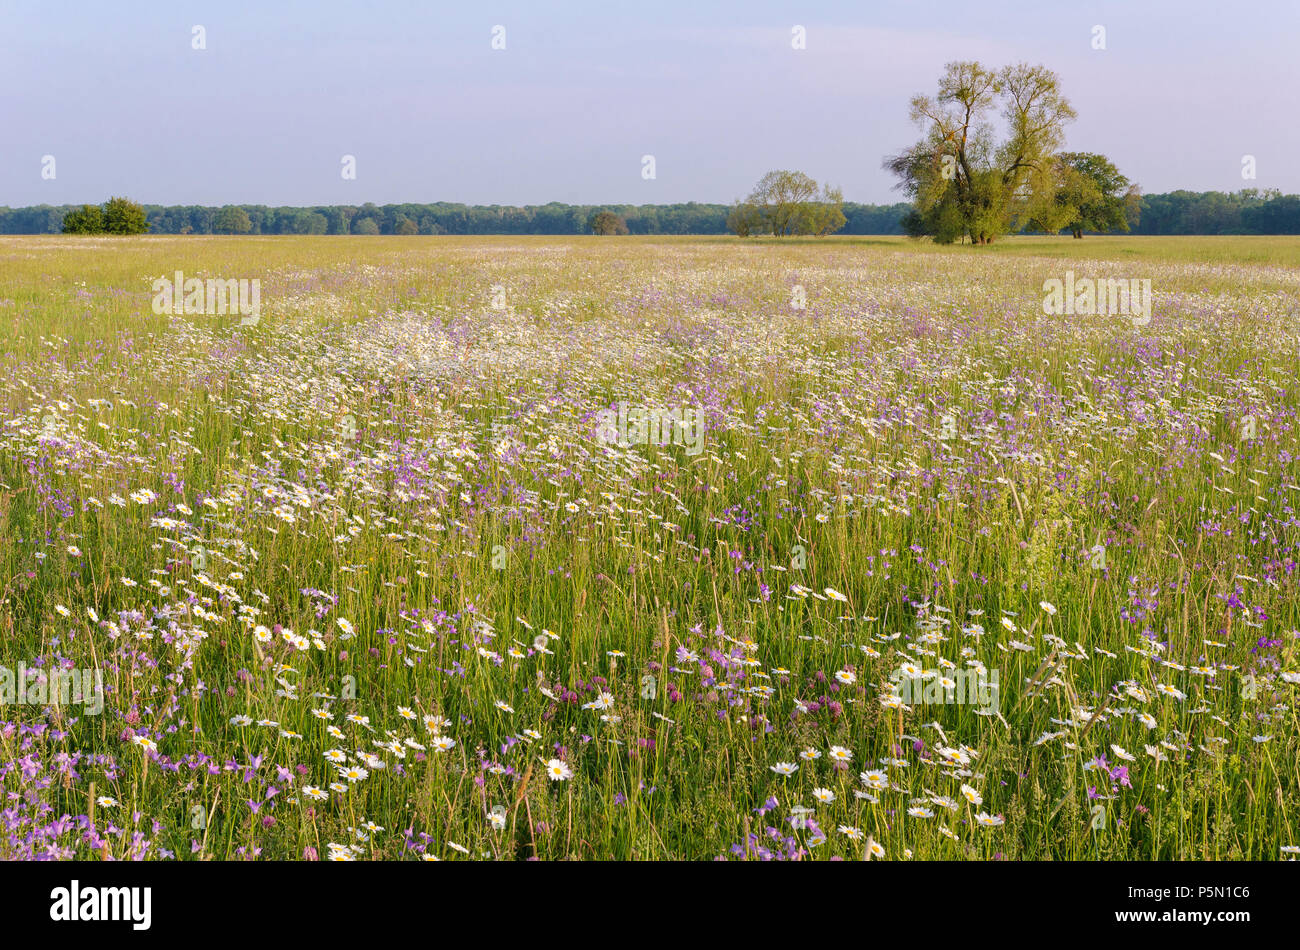 beautiful field in the countryside filled with blooming spring flowers Stock Photo